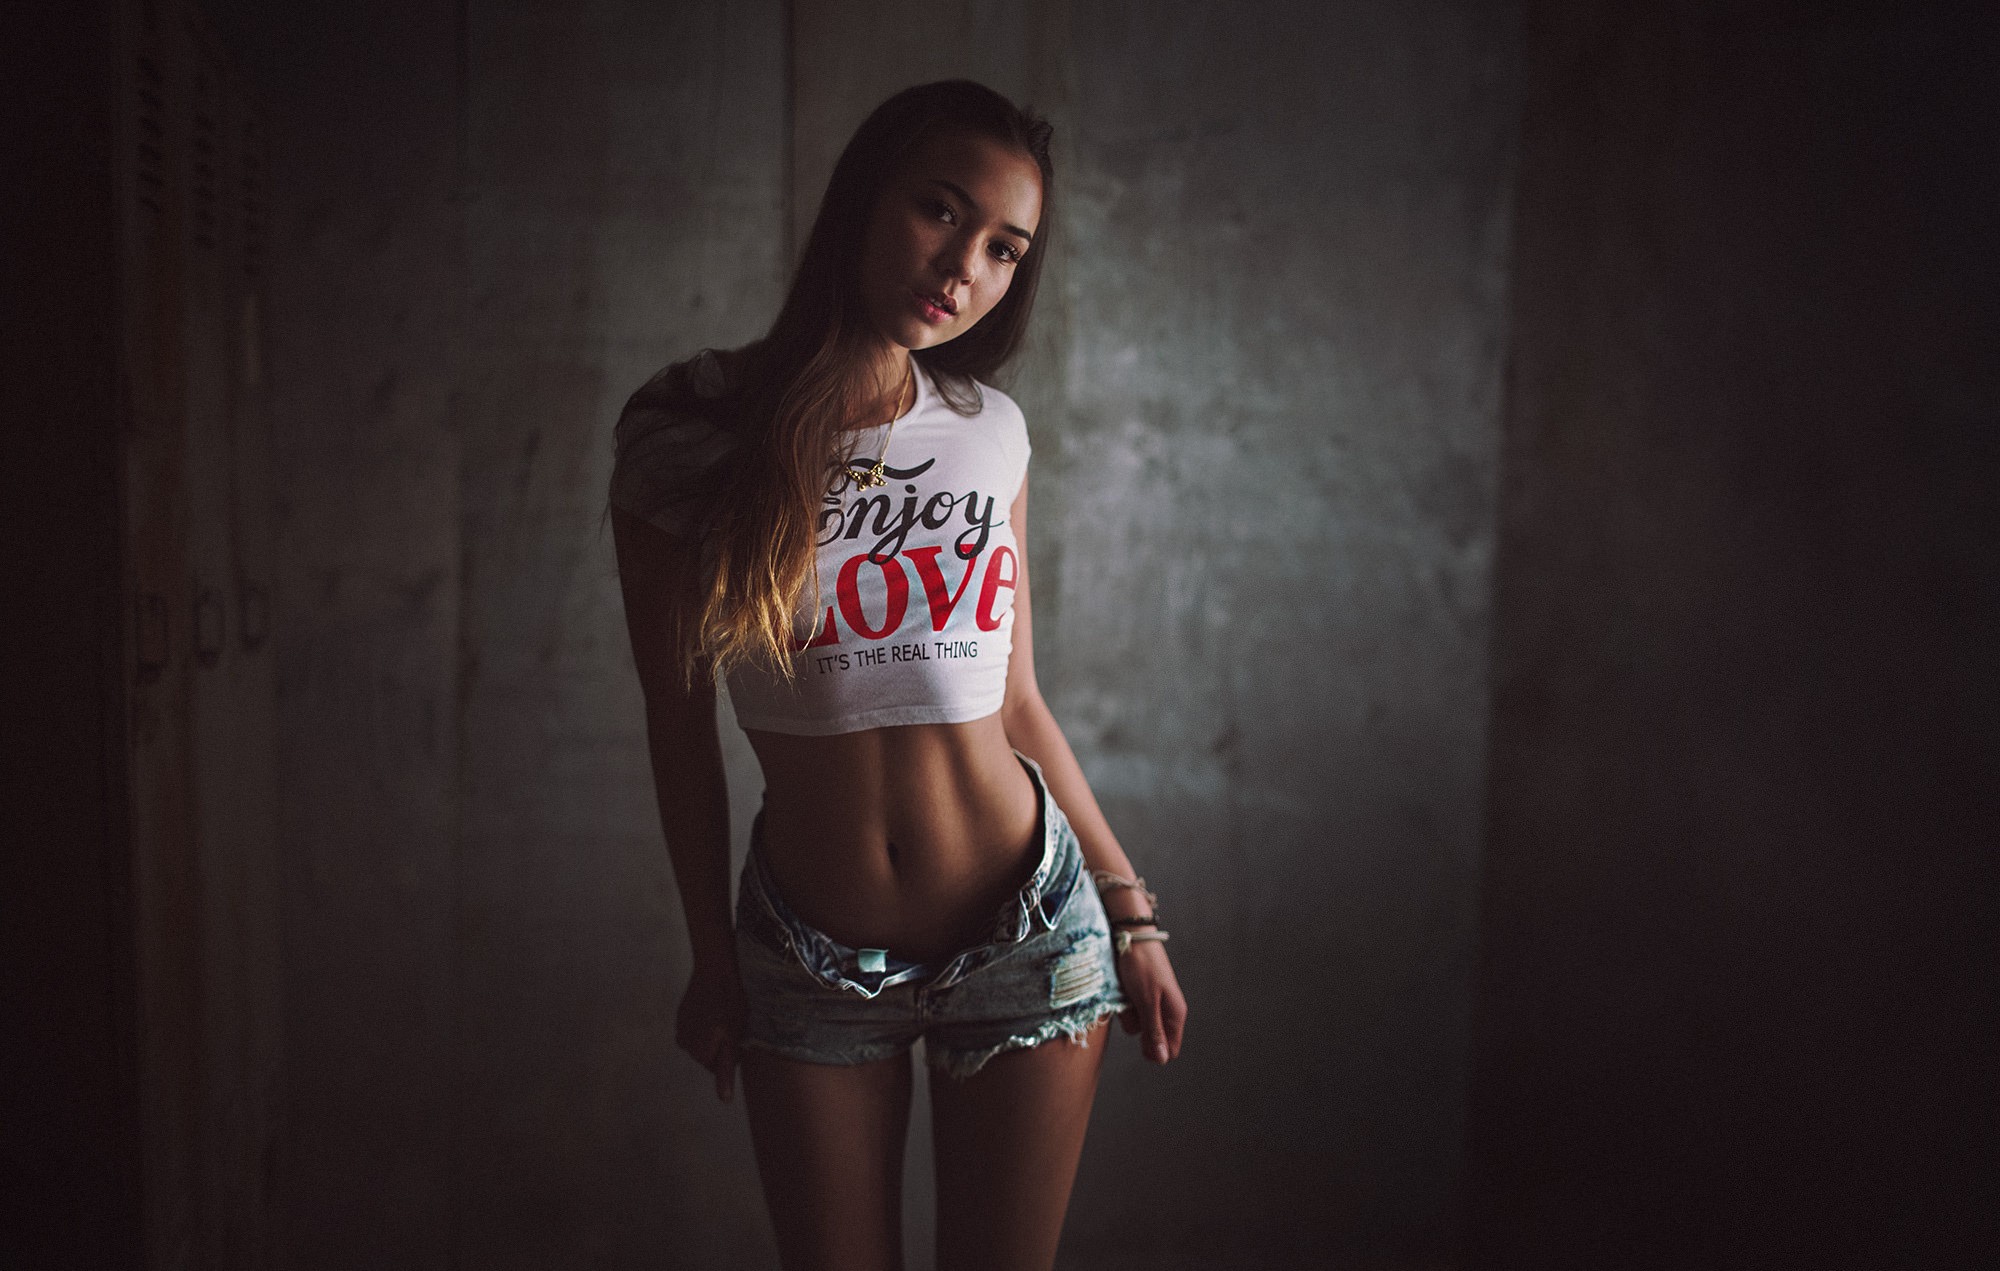 People 2000x1271 women Michelle Lit skinny jean shorts T-shirt crop top belly slim body unbuttoned printed shirts long hair women indoors indoors model looking at viewer